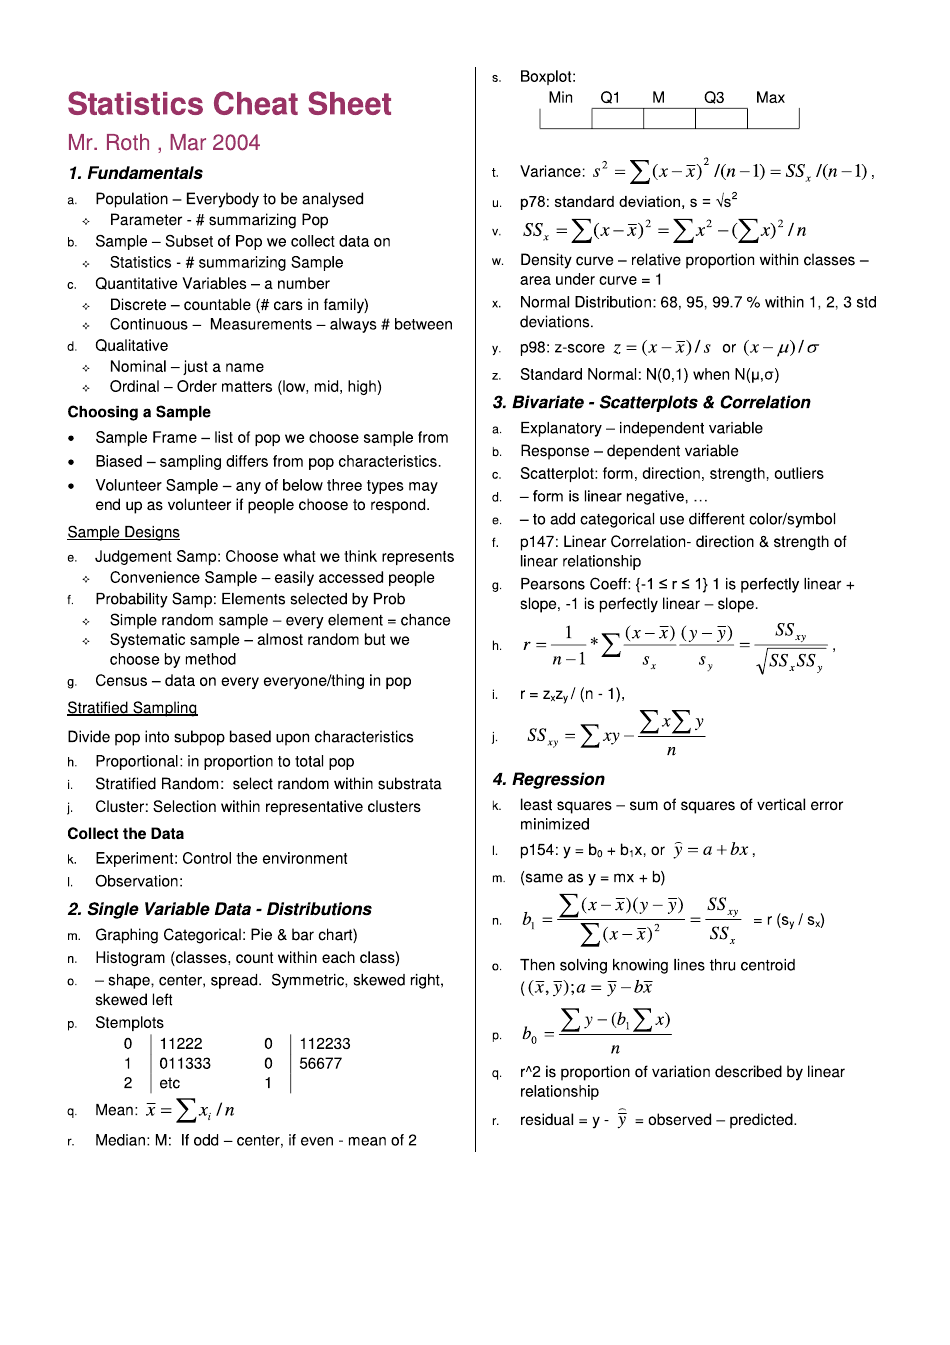 Statistics Cheat Sheet for Principles of Statistics Course at University of Nevada